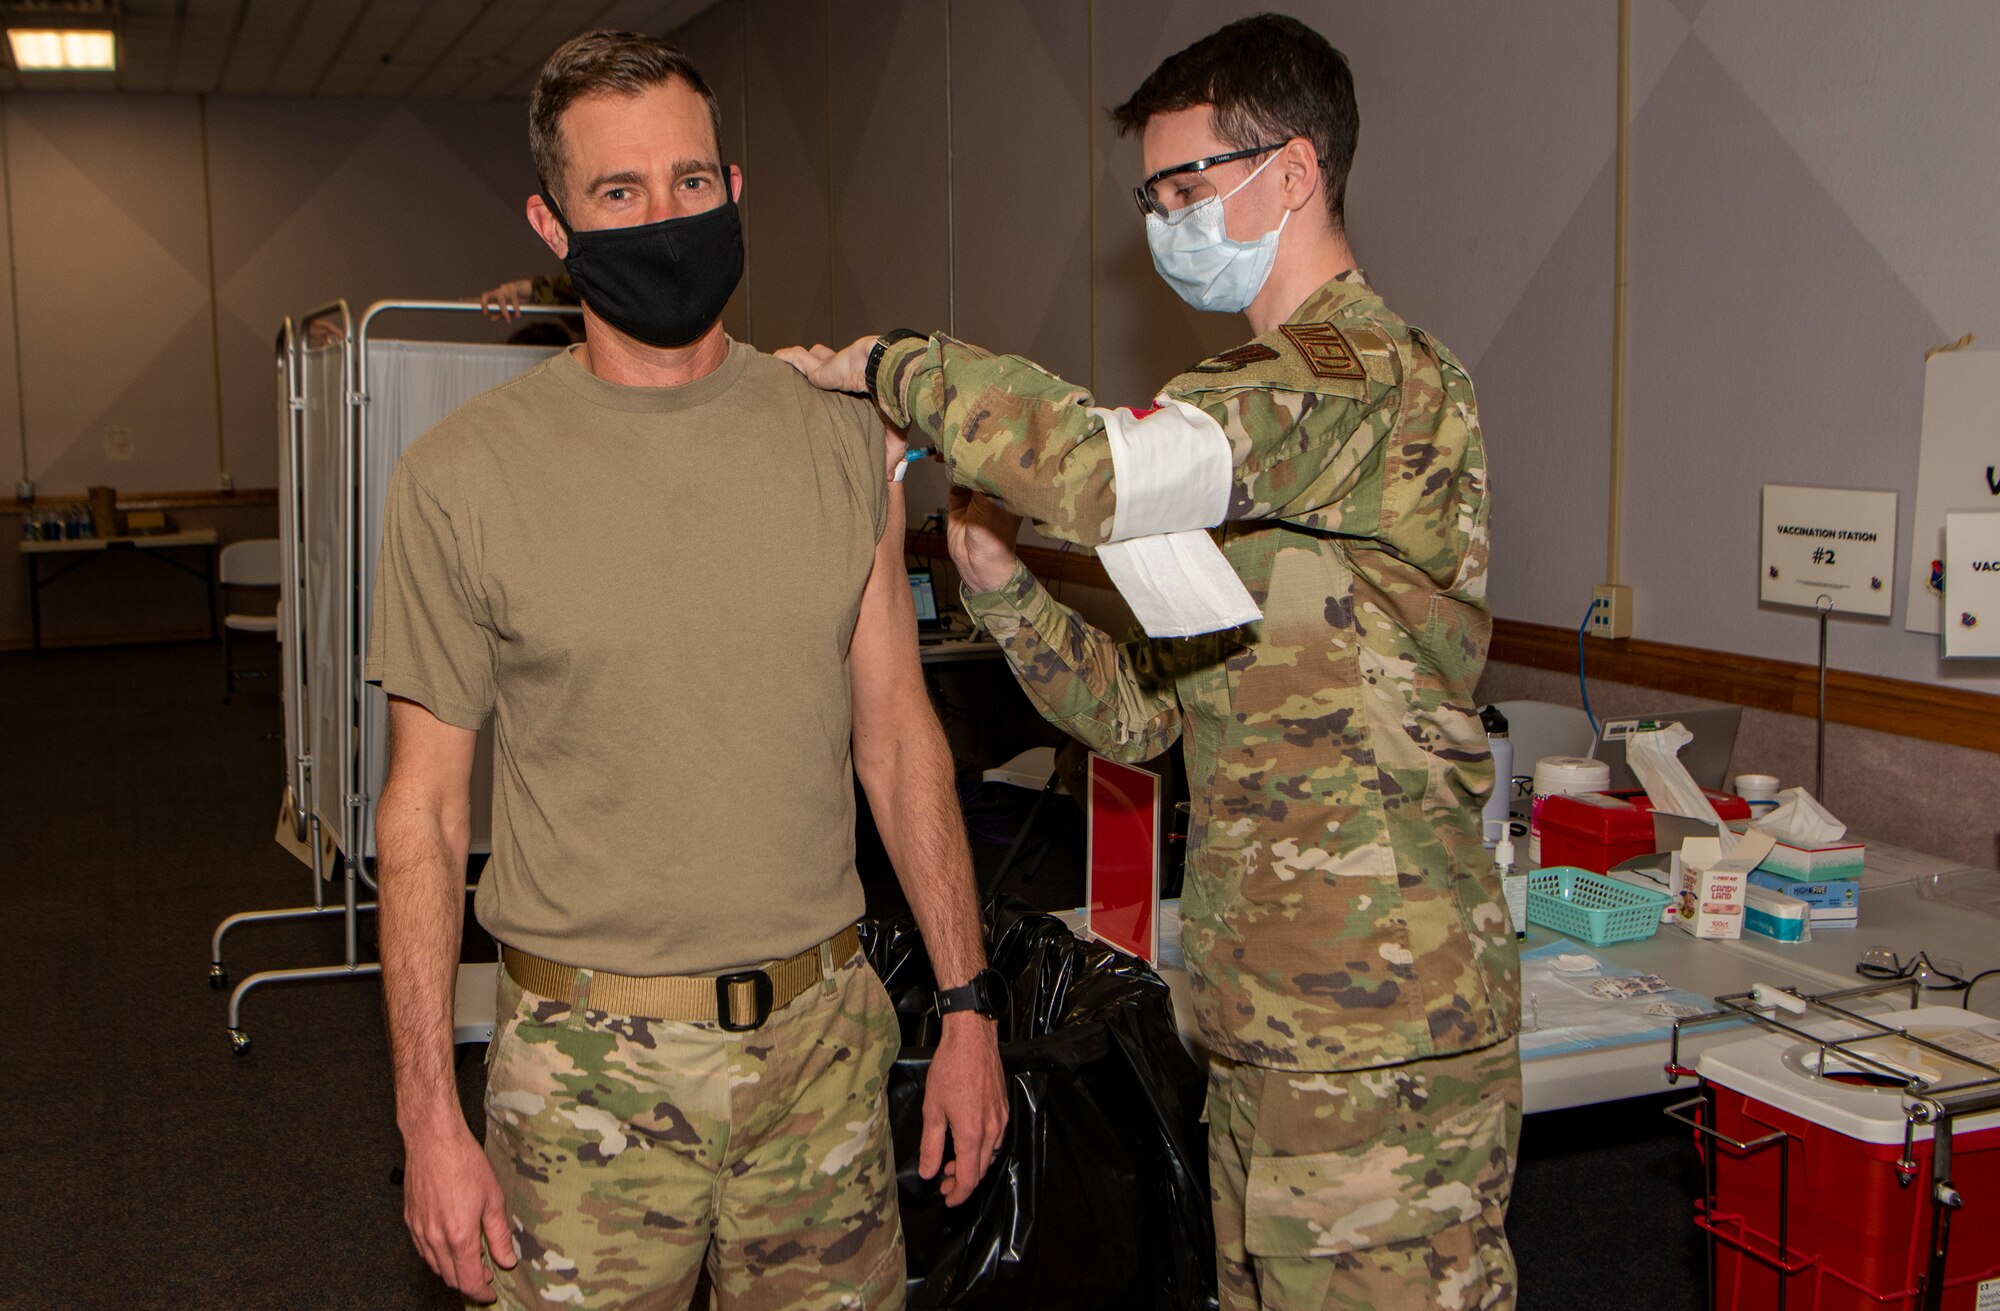 Airman receives a shot in the arm.